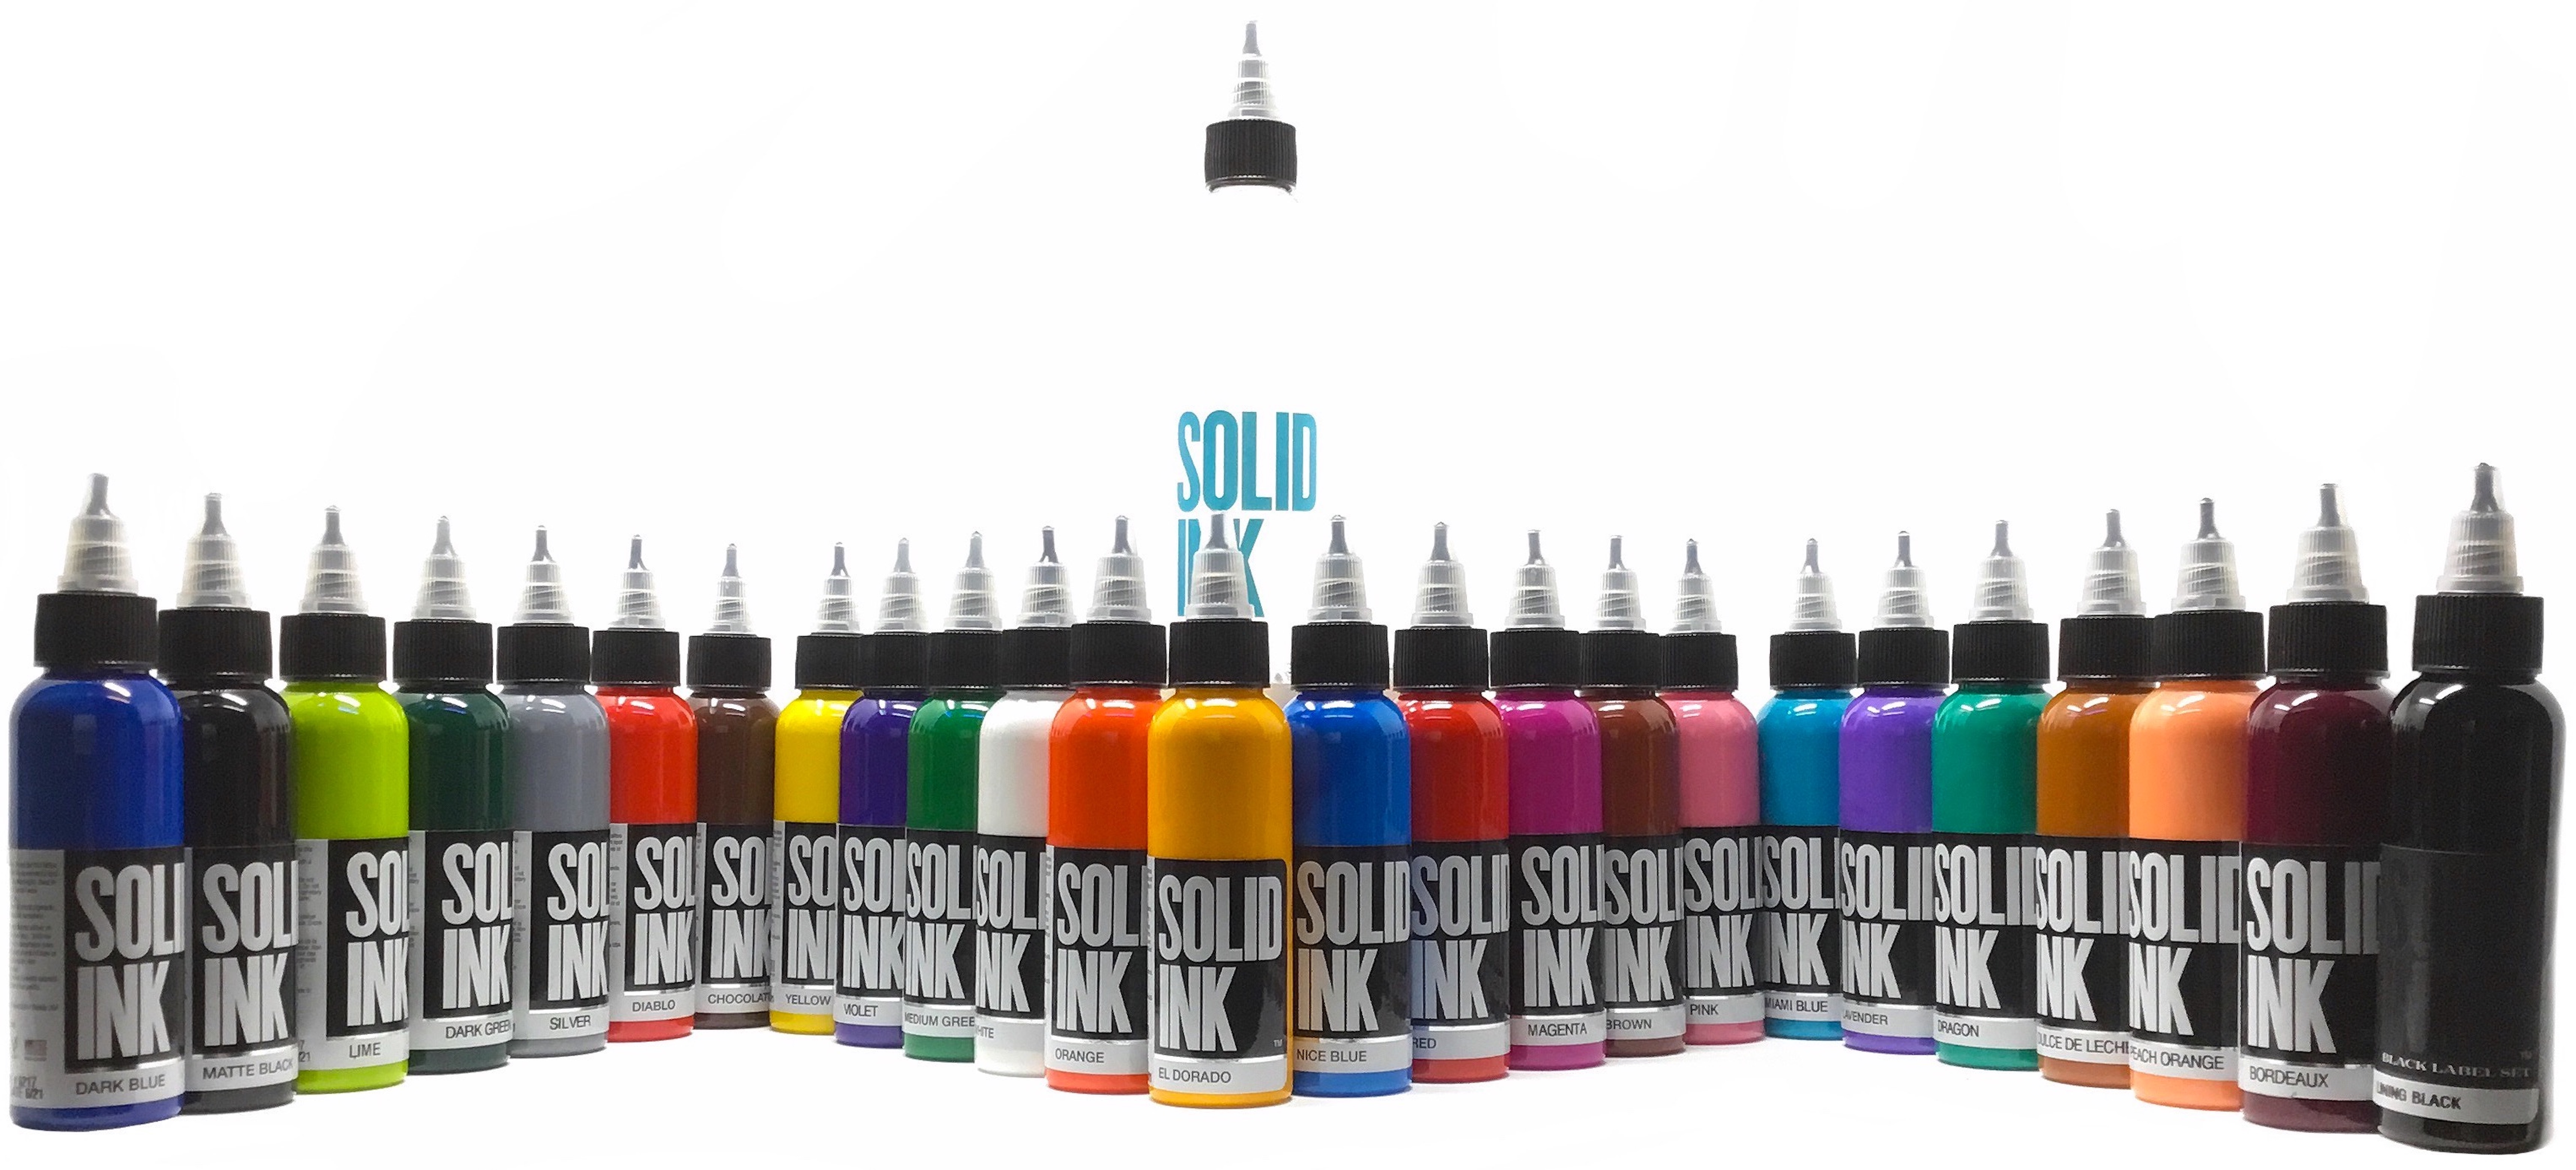 Bloodline Tattoo Ink & Sets Tattooing Inks Professional All Colors Red Blue  Pink